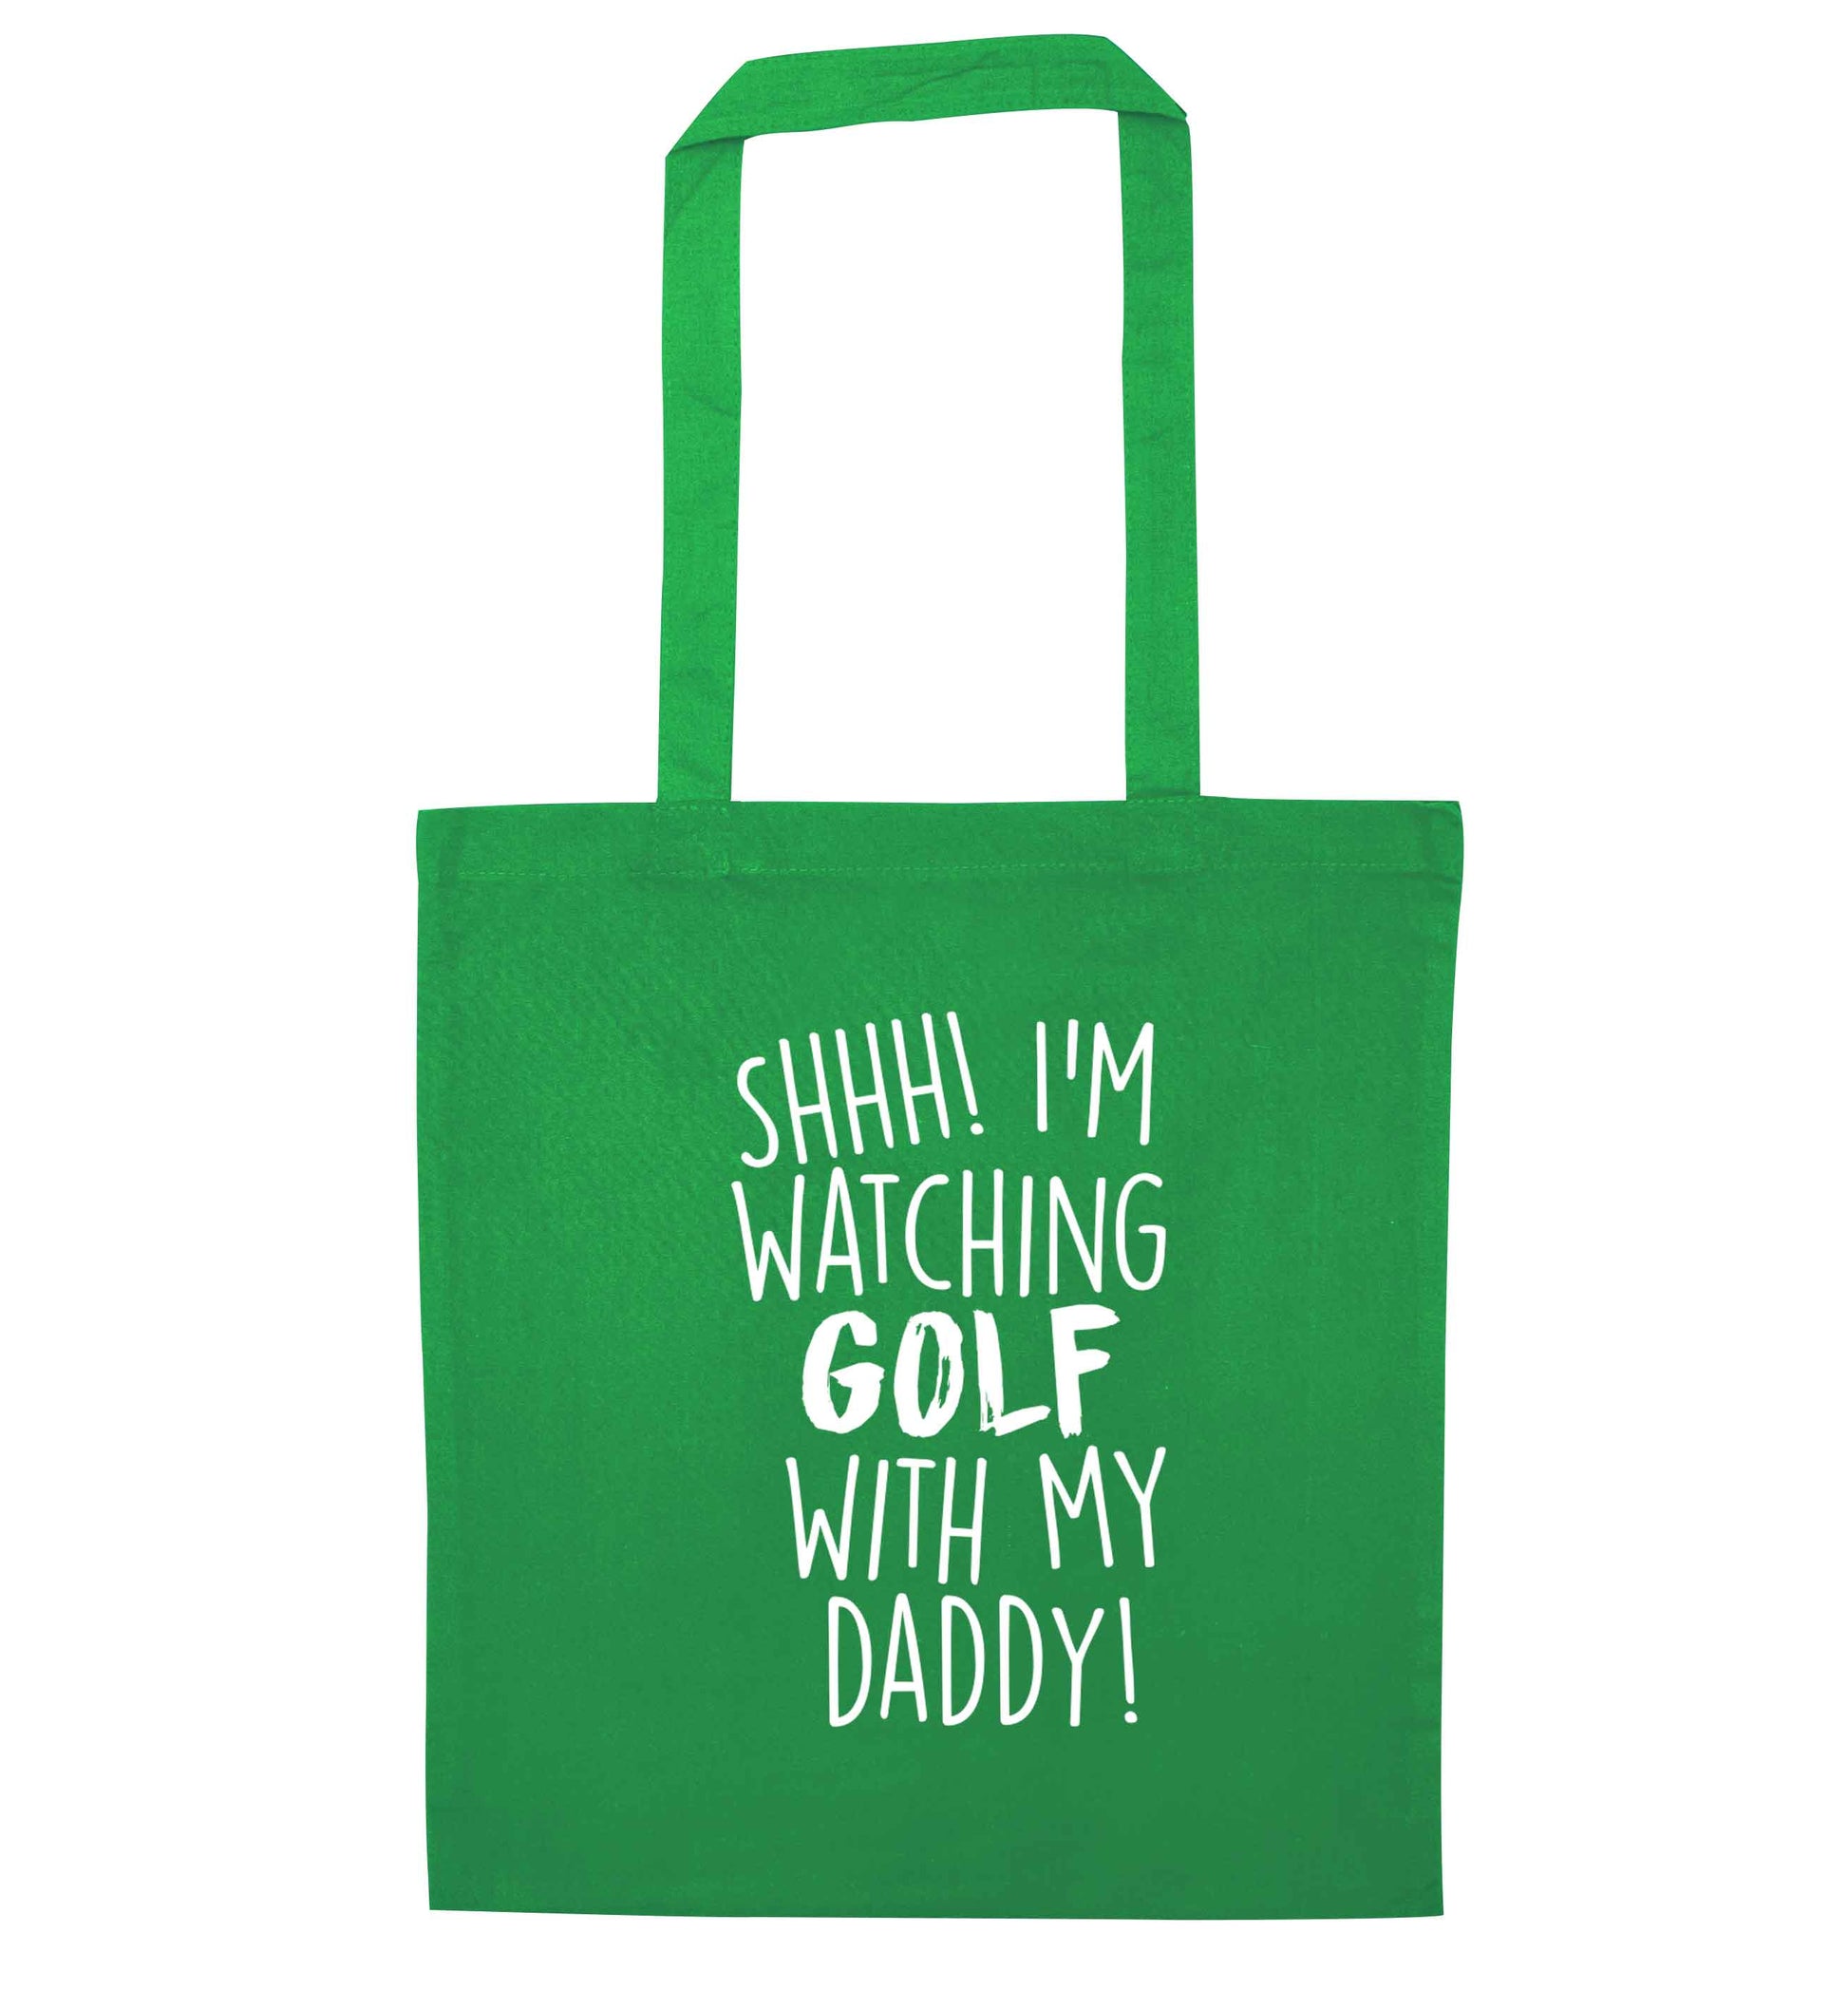 Shh I'm watching golf with my daddy green tote bag